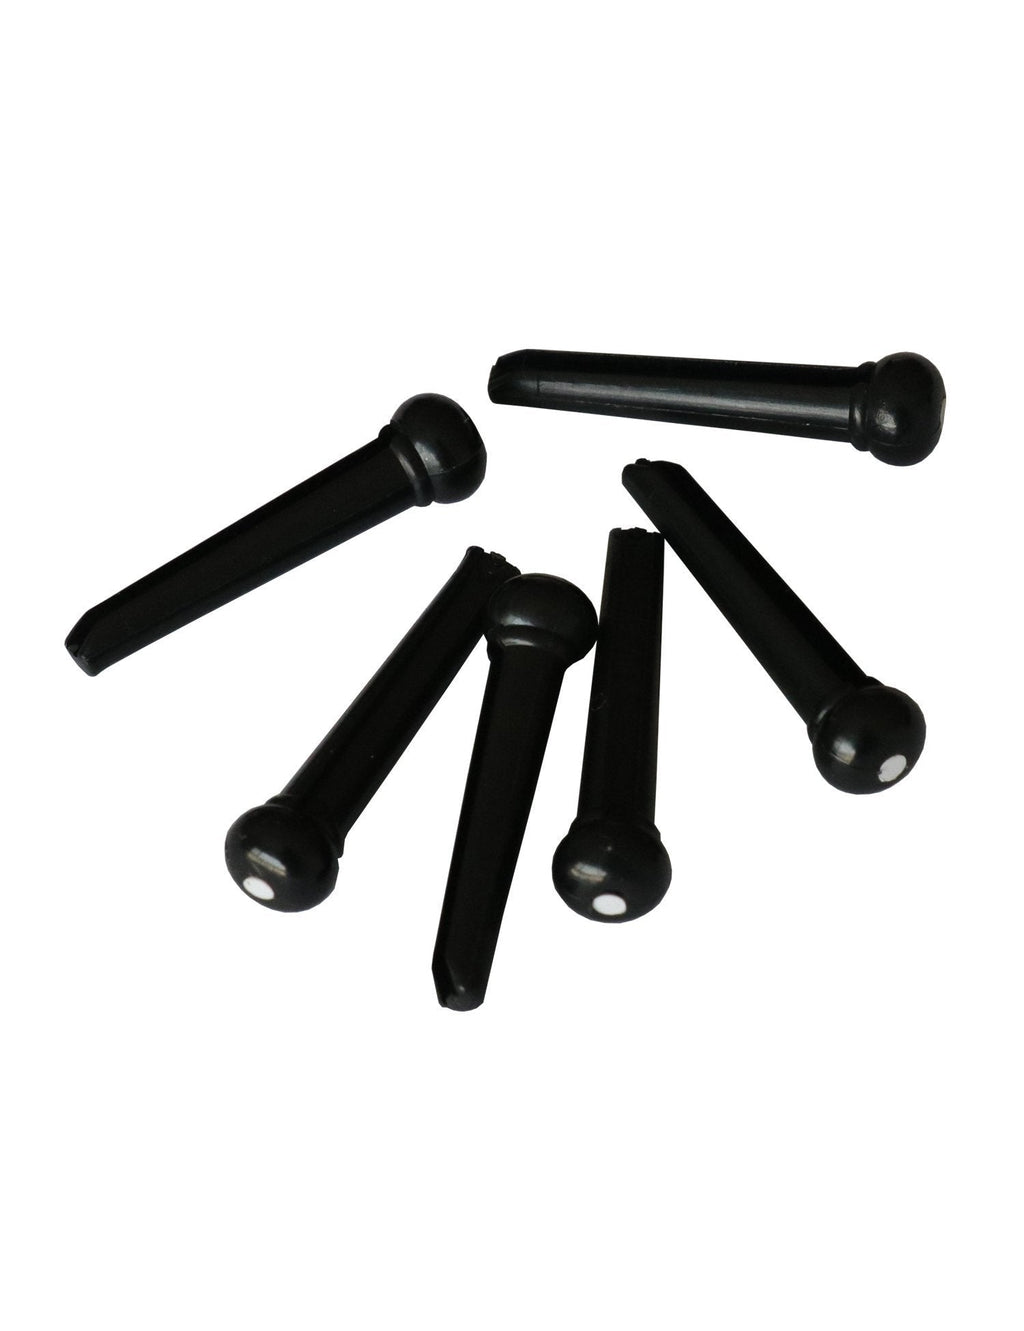 Metallor Acoustic Guitar Bridge Pins String Peg Guitar Parts Replacement Pack of 6 Pieces Black with White Dot.